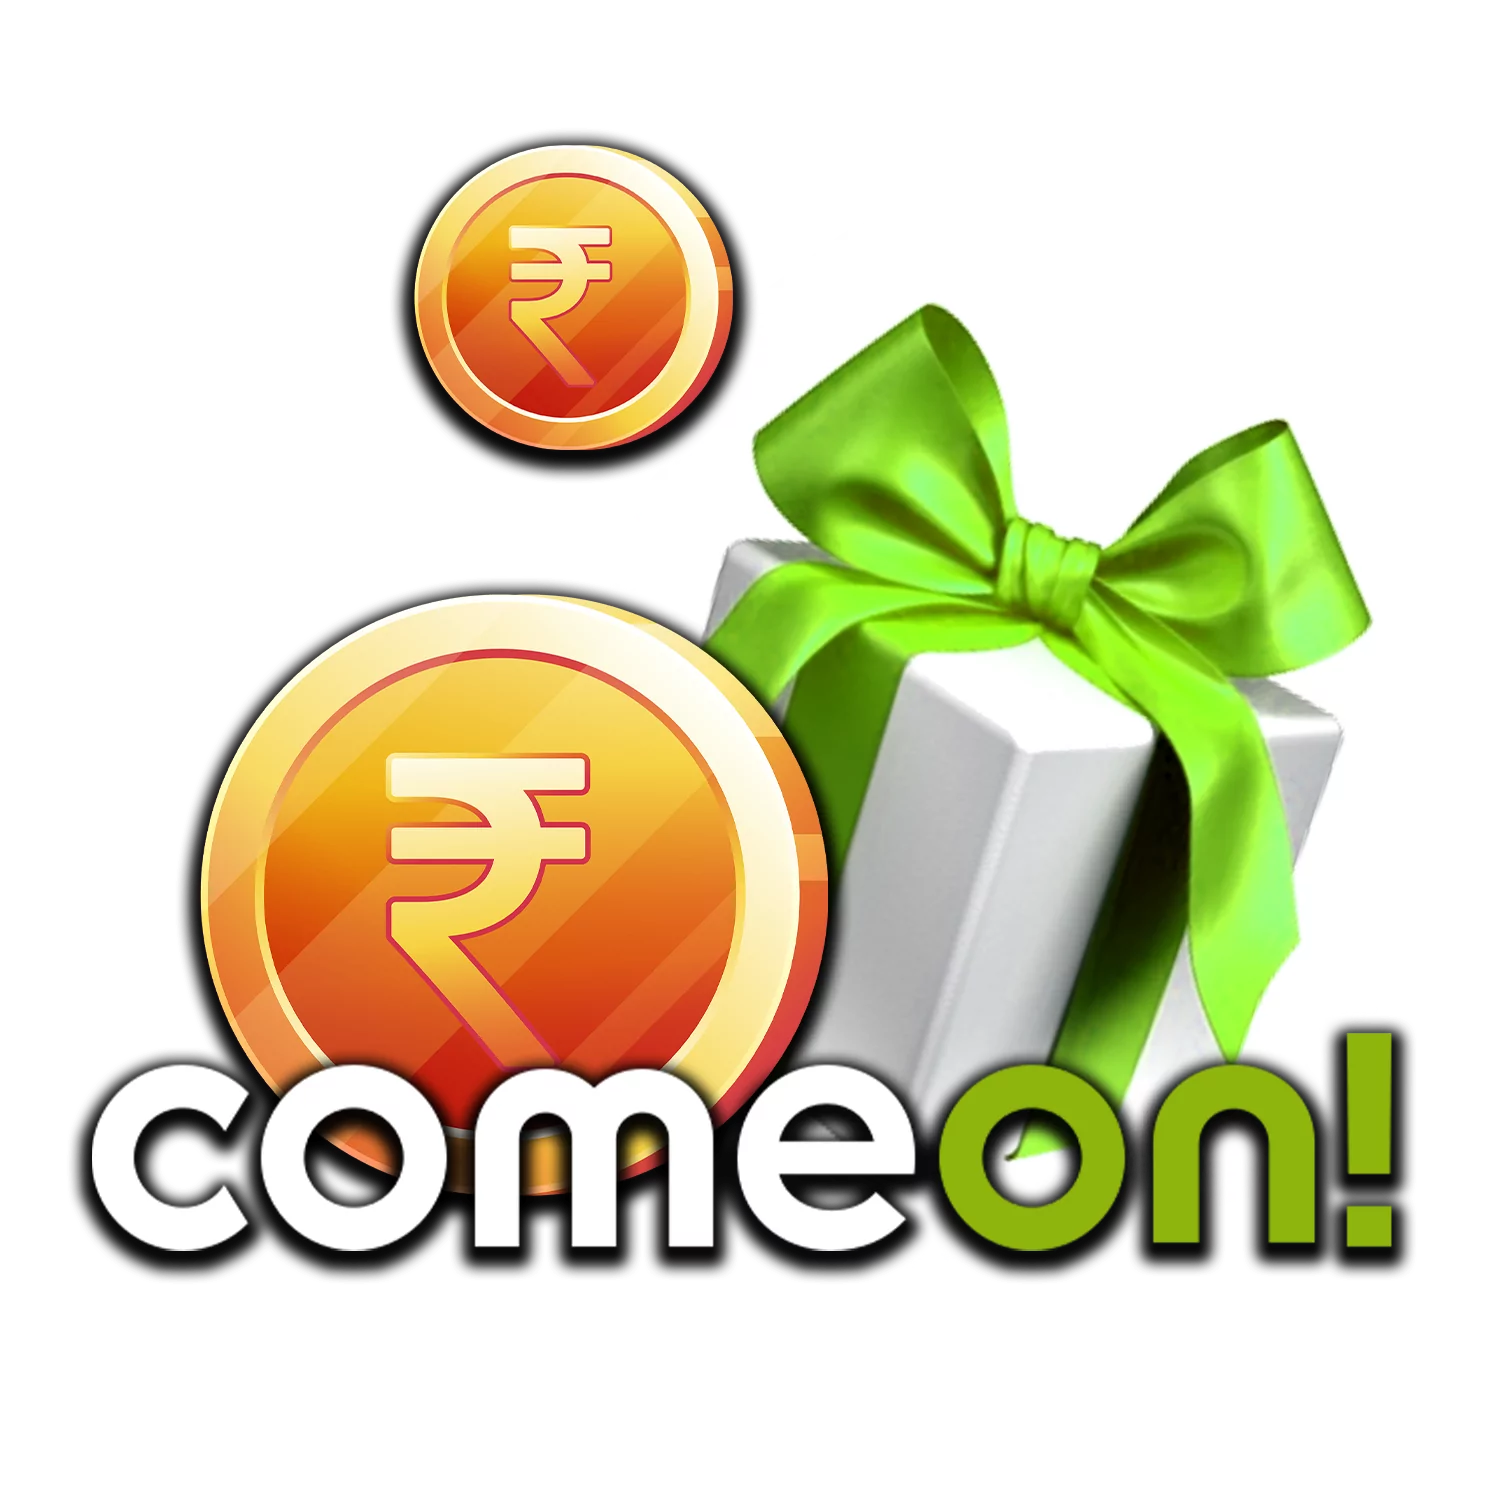 Learn how to get a welcome bonus and other bonuses from Comeon.